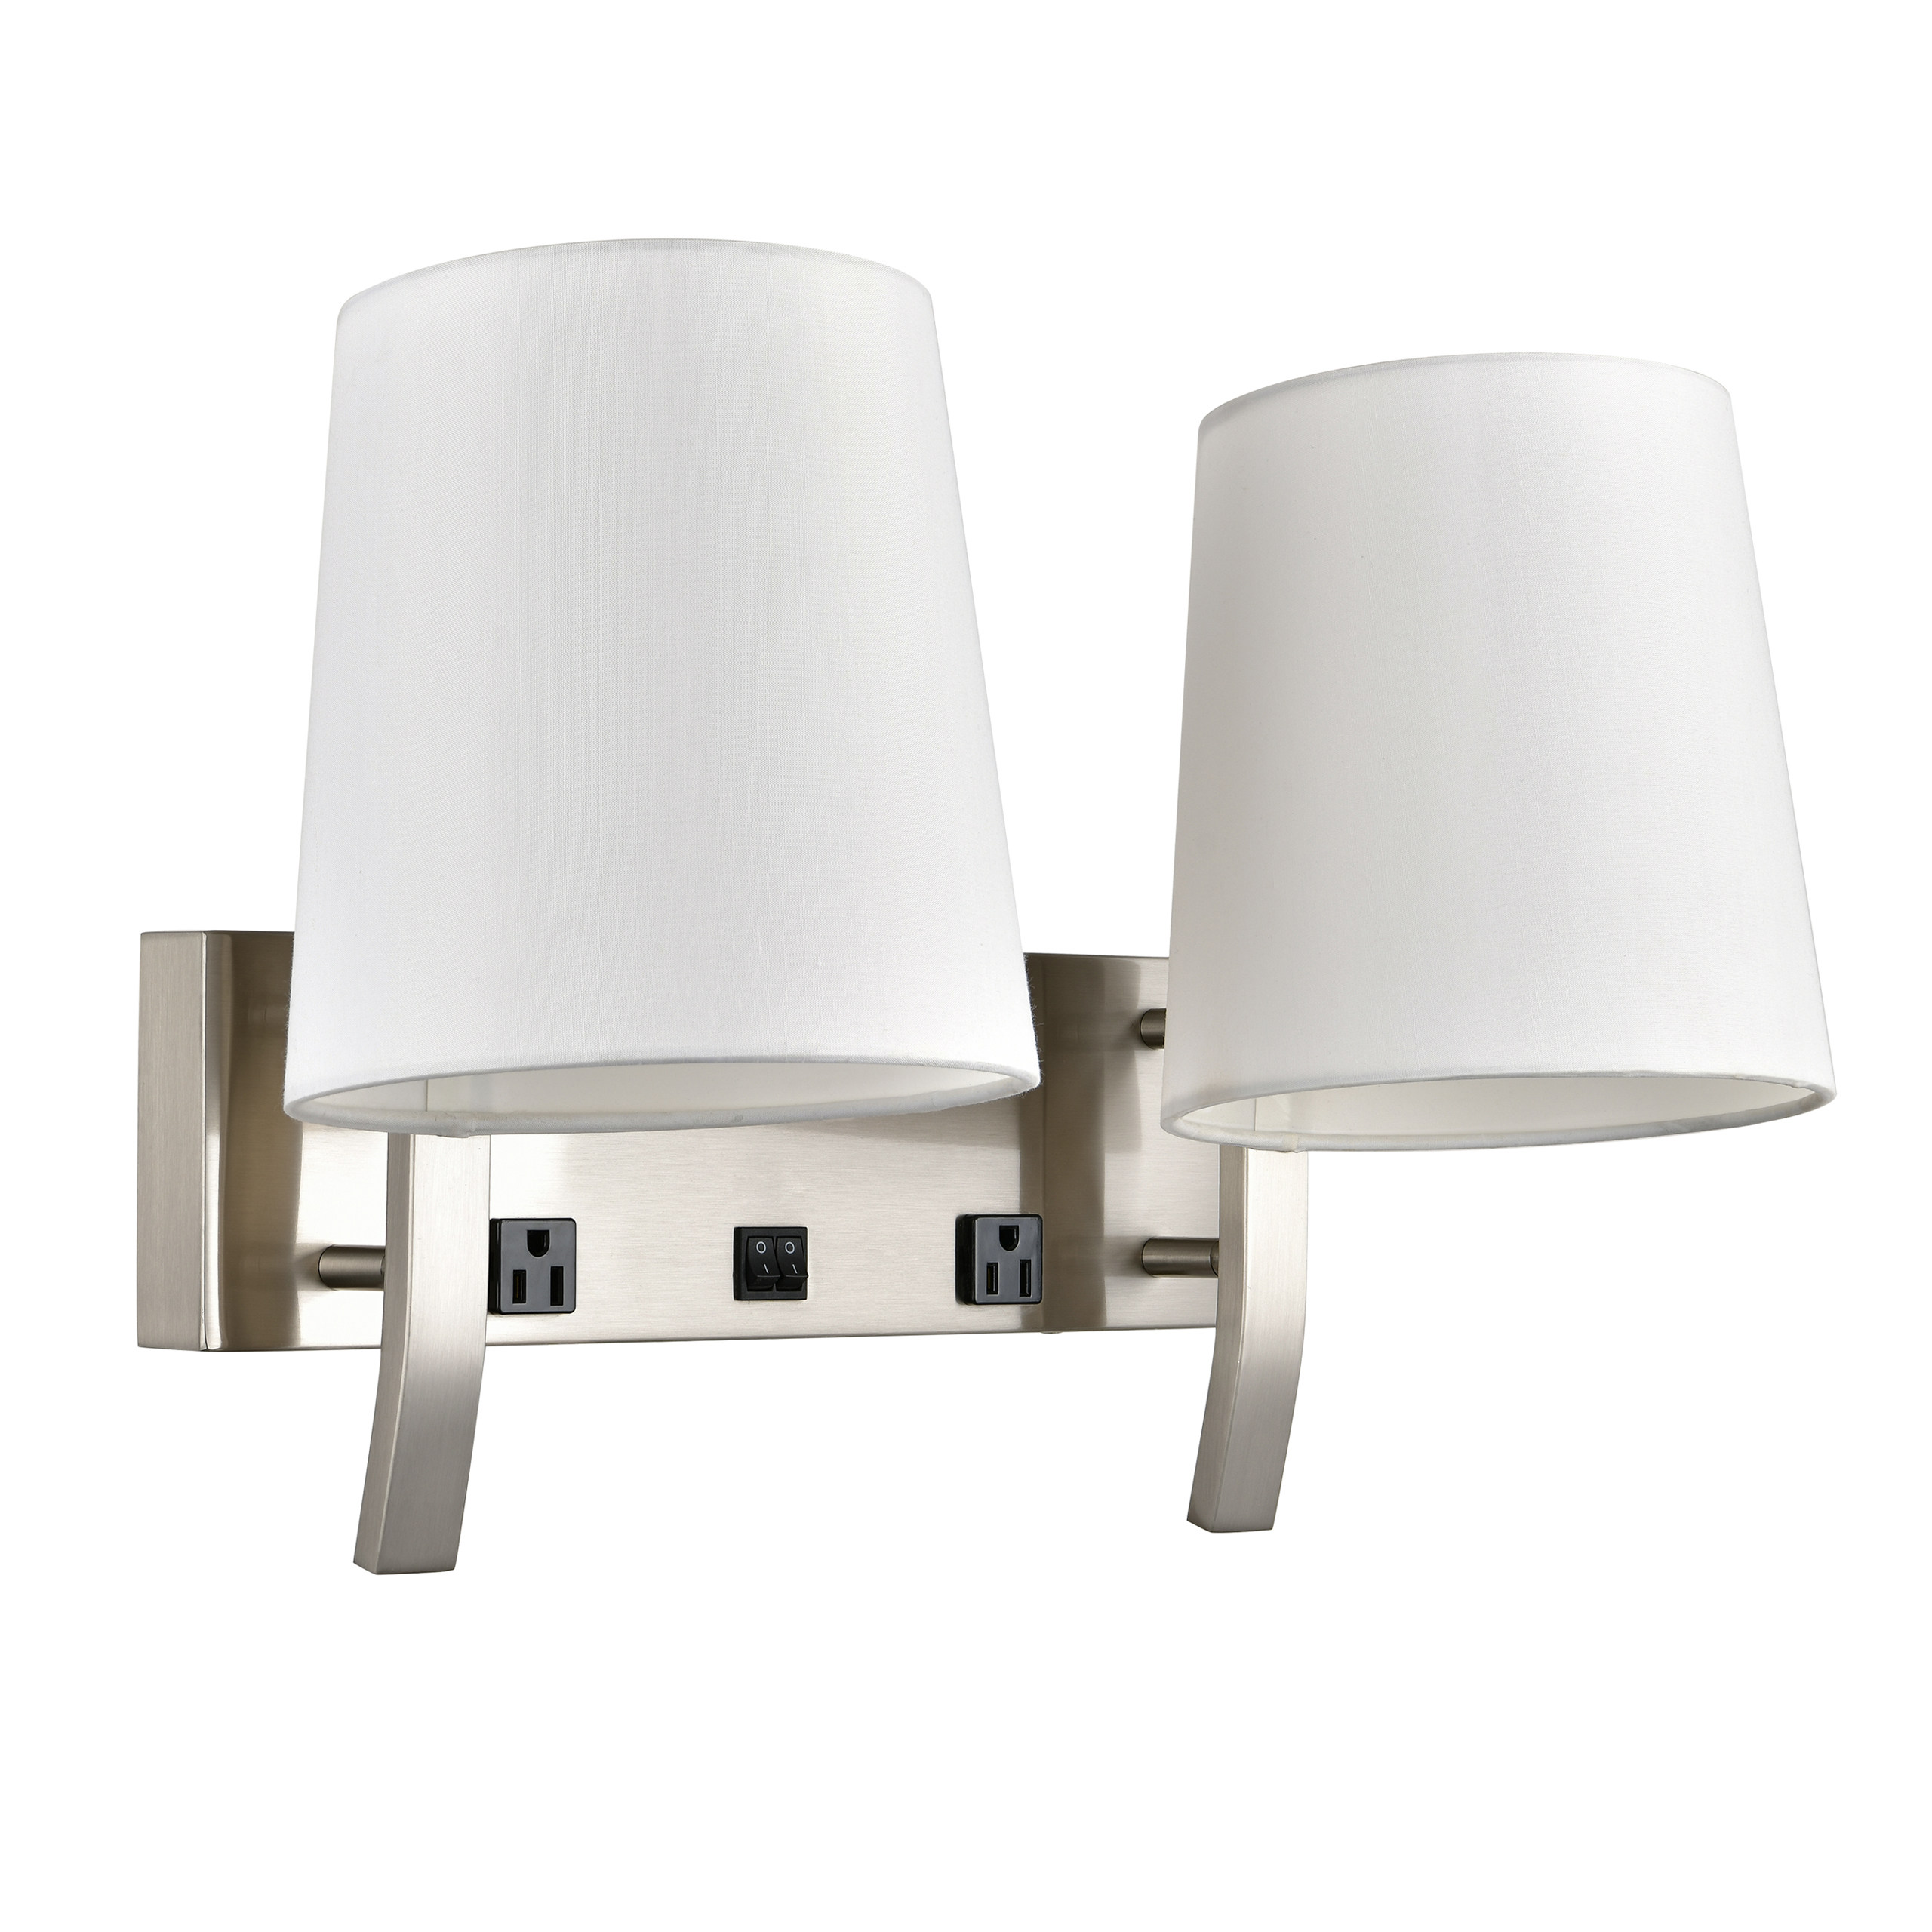 https://www.hotel-lamps.com/resources/assets/images/product_images/1658411335.XL-WD043-BN.jpg